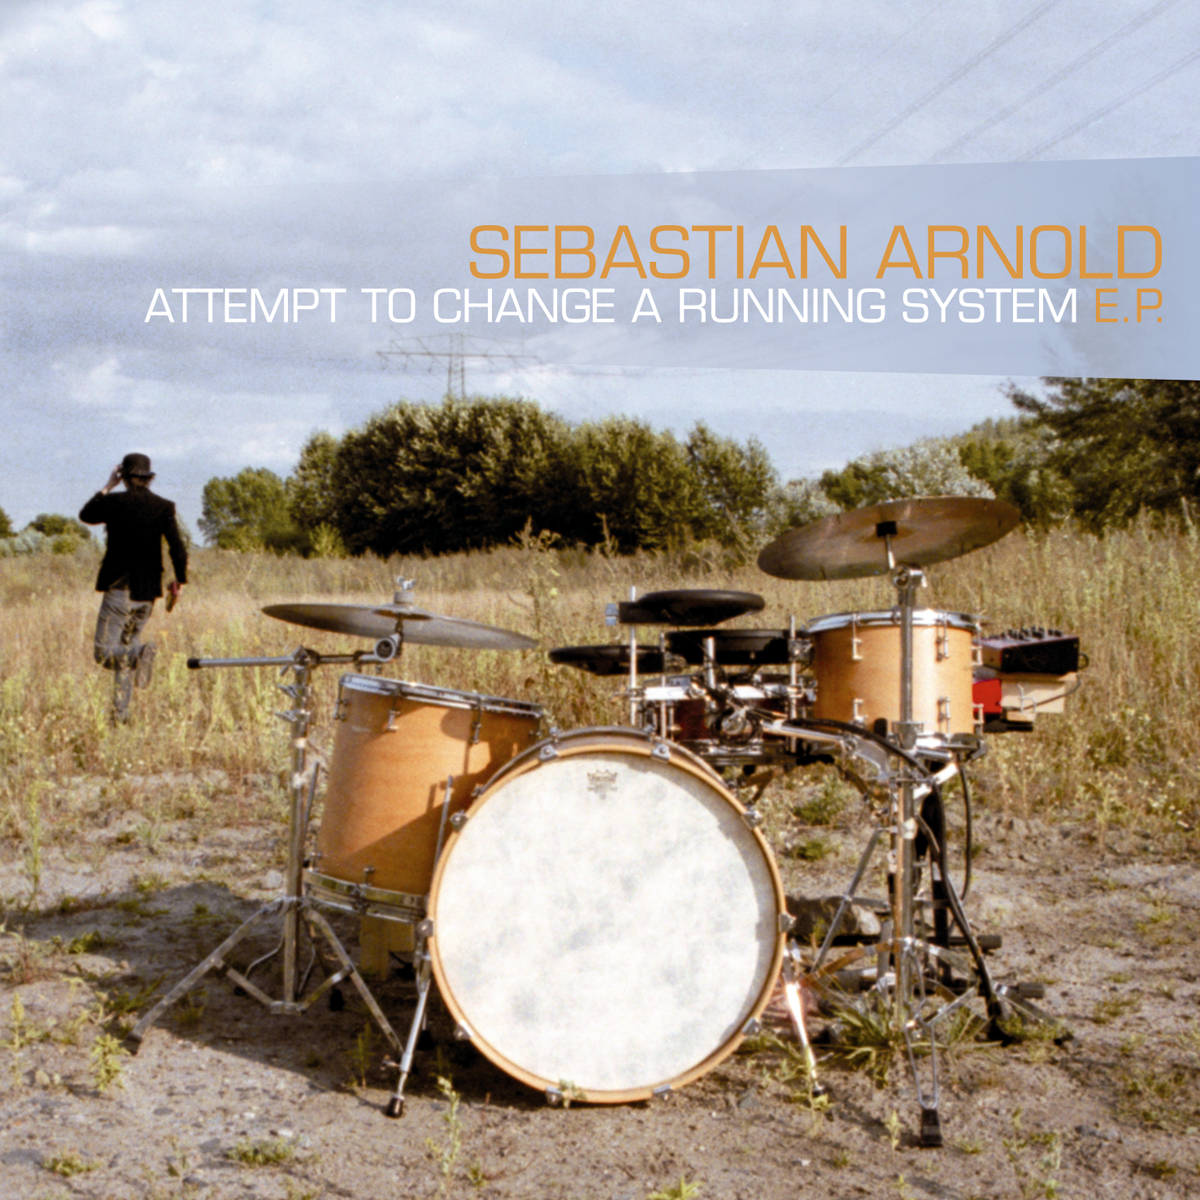 Sebastian Arnold – Attempt to change a running system e.p.